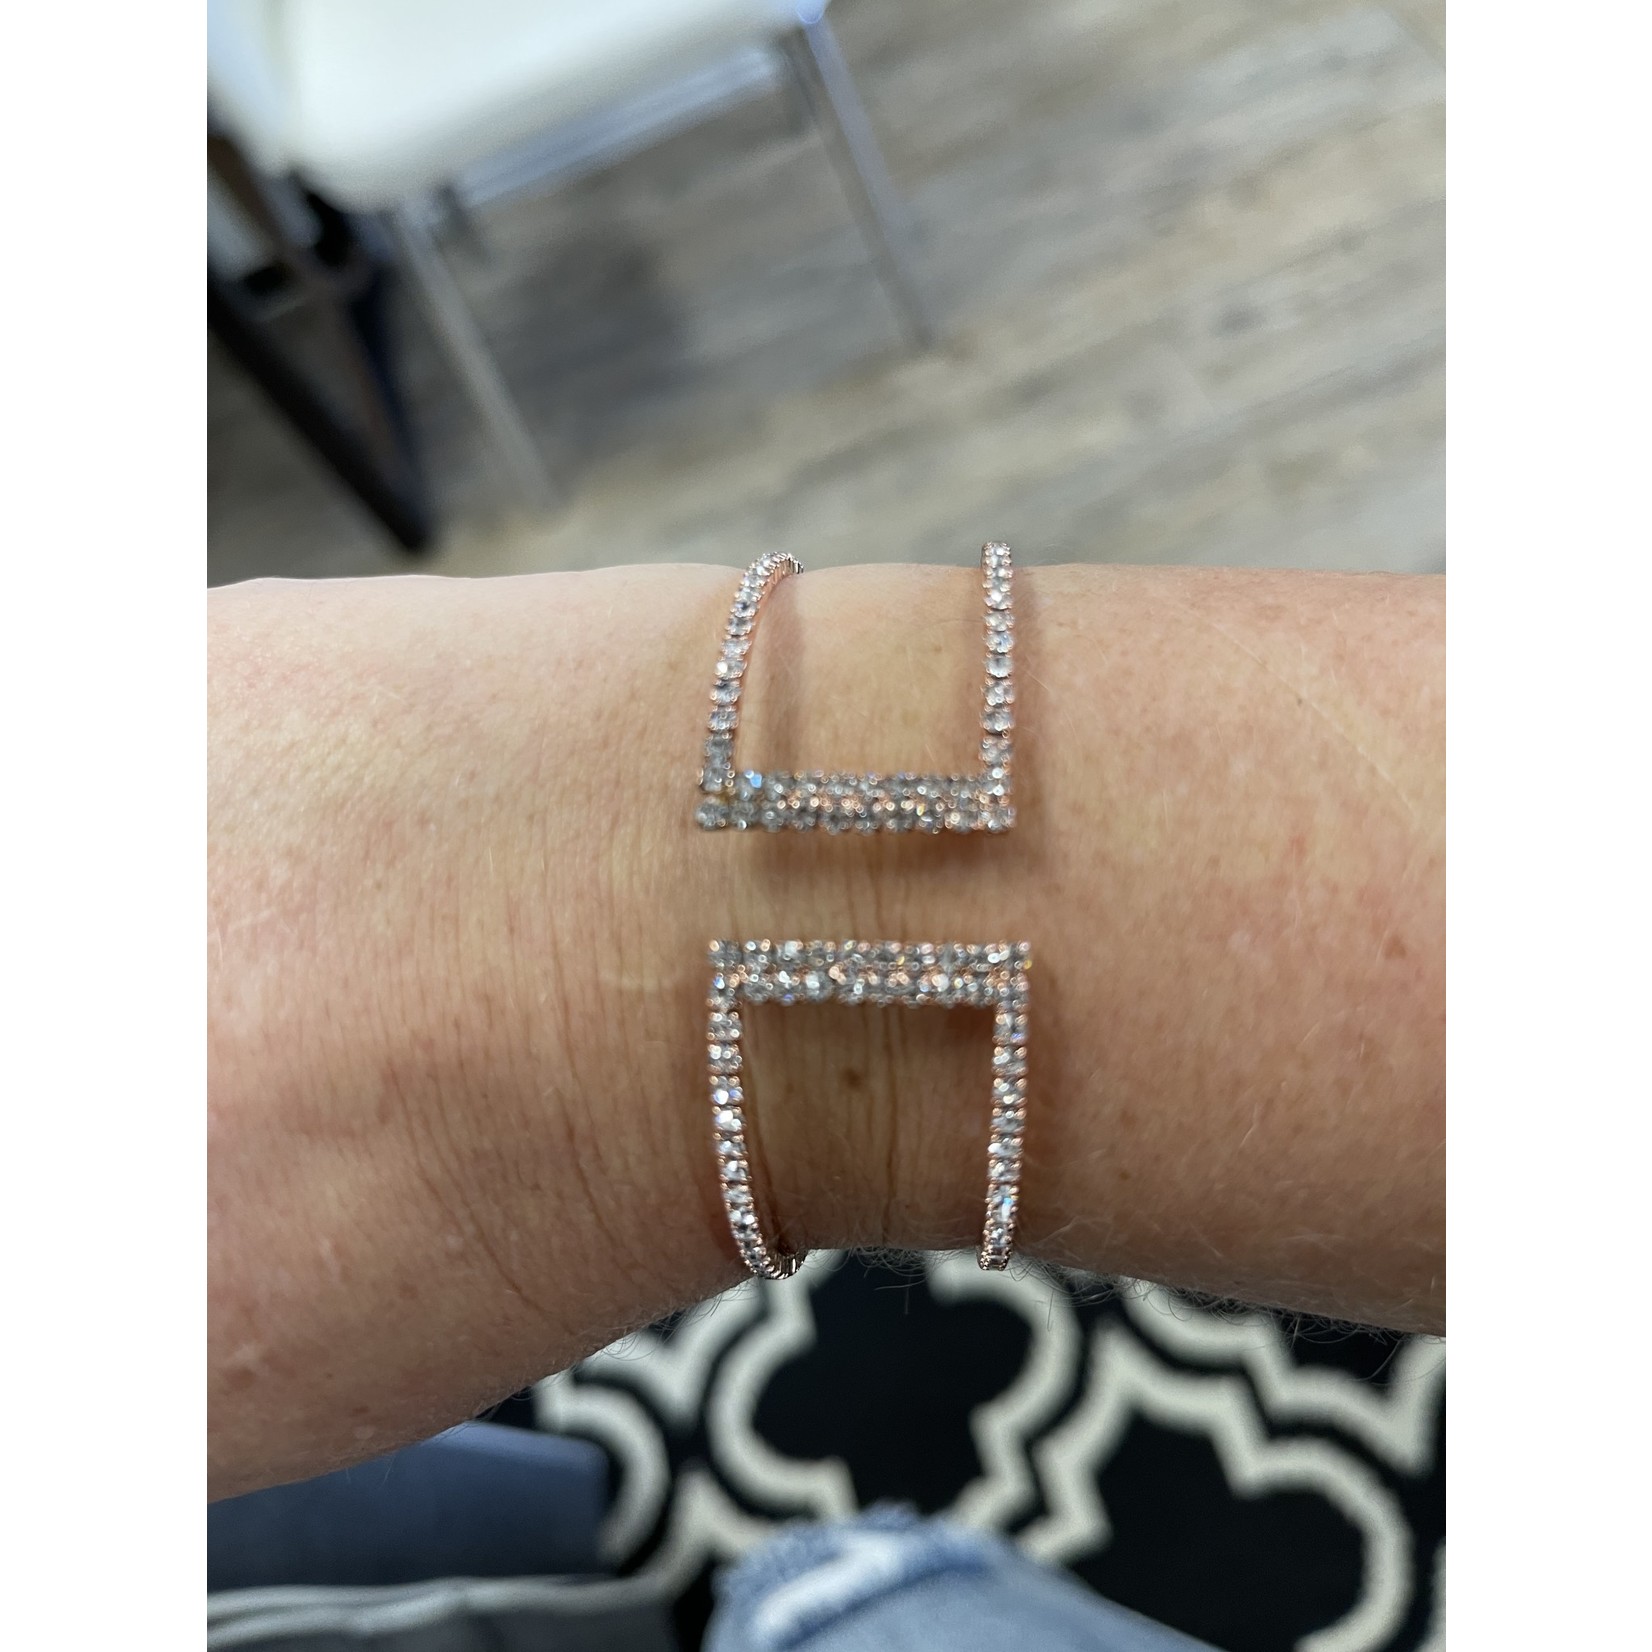 All That Glitterz Adjustable Bracelets with Bling